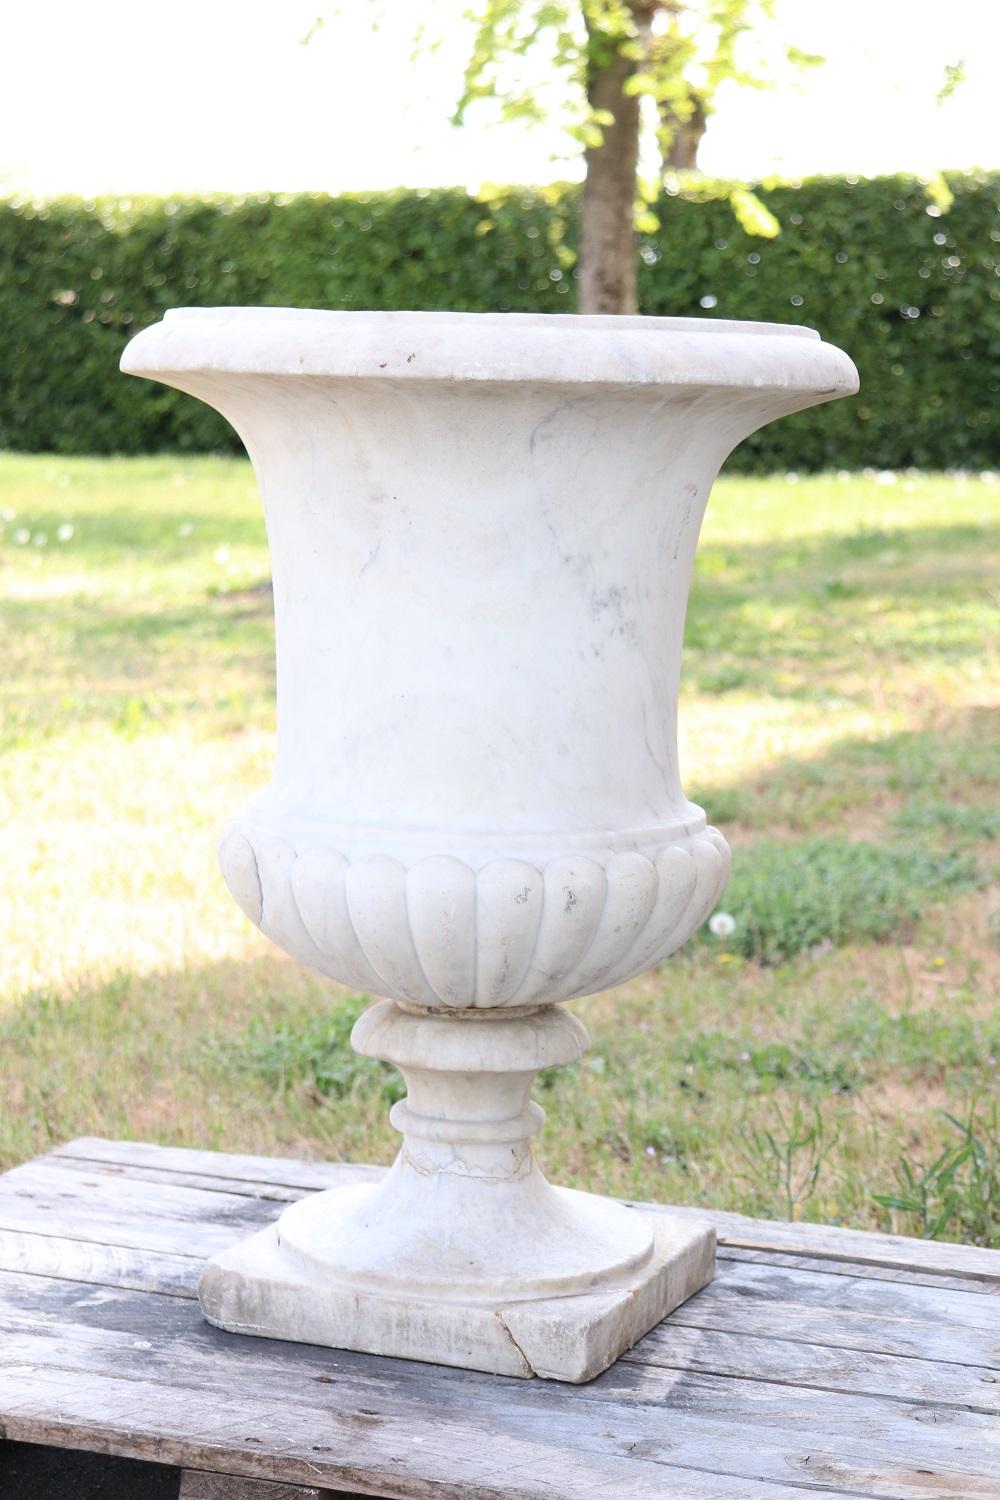 Beautiful refined garden ad outdoor vase. Beautiful and majestic in italian white Carrara marble. The vase has a refined Classic decoration in sinuous Medici shape. The marble shows signs of the passage of time and some repairs. This vase is perfect